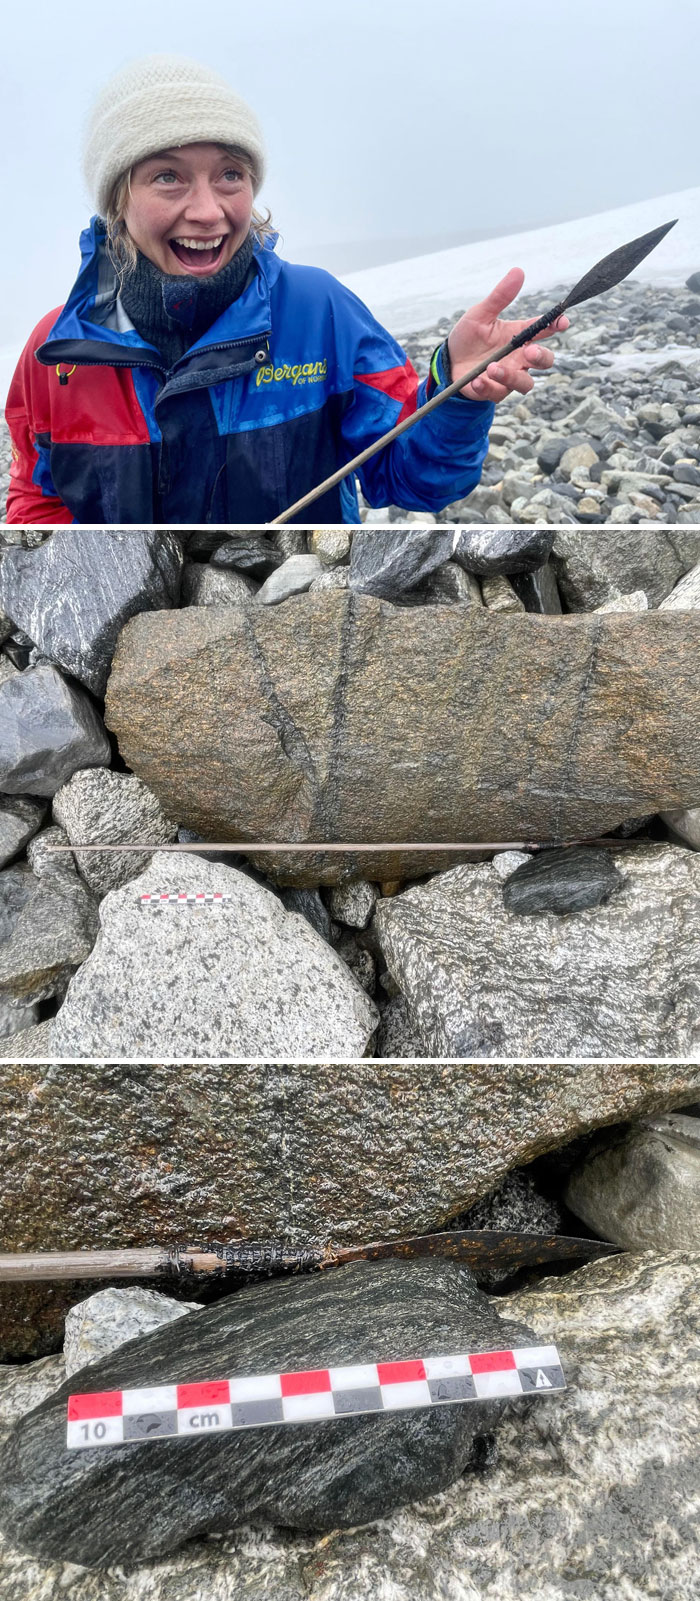 This Is Why We Love Glacial Archaeology! See How Happy We Are When We Get To Hold An Arrow, Which Has Been Lost In The Ice For 1500 Years